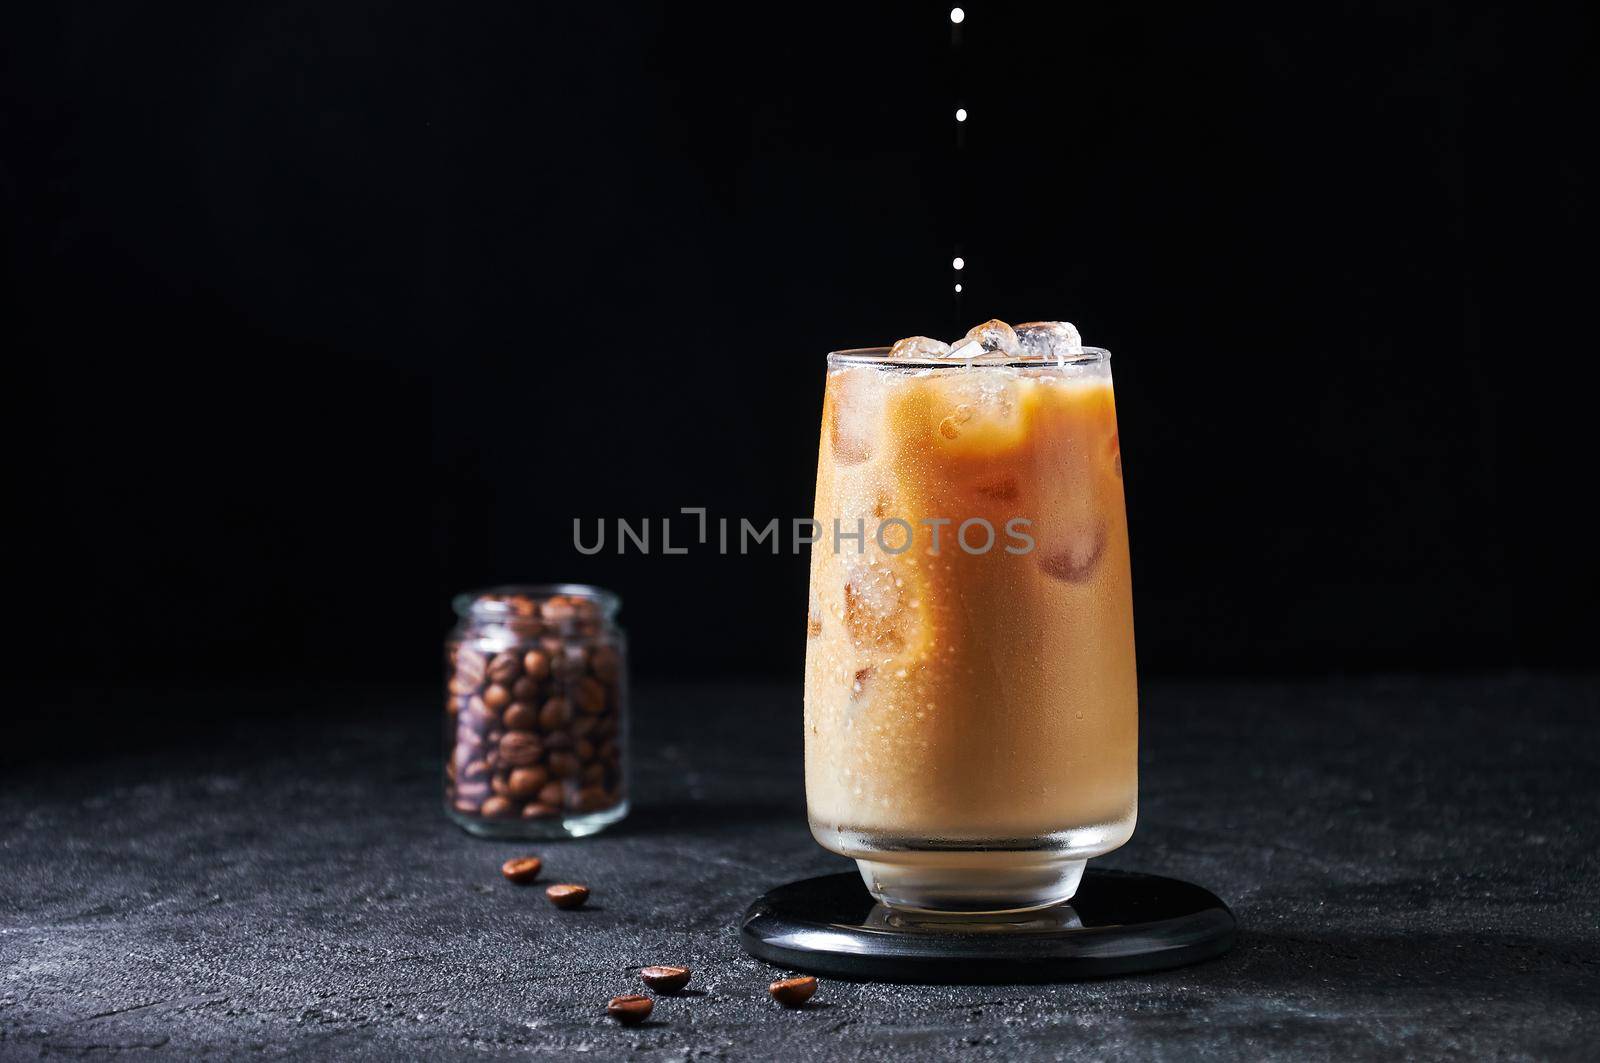 Cold Summer Drink. Iced Coffee with Milk Drops in Tall Glass on Dark Background. Drinks in Motion. Copy Spase.